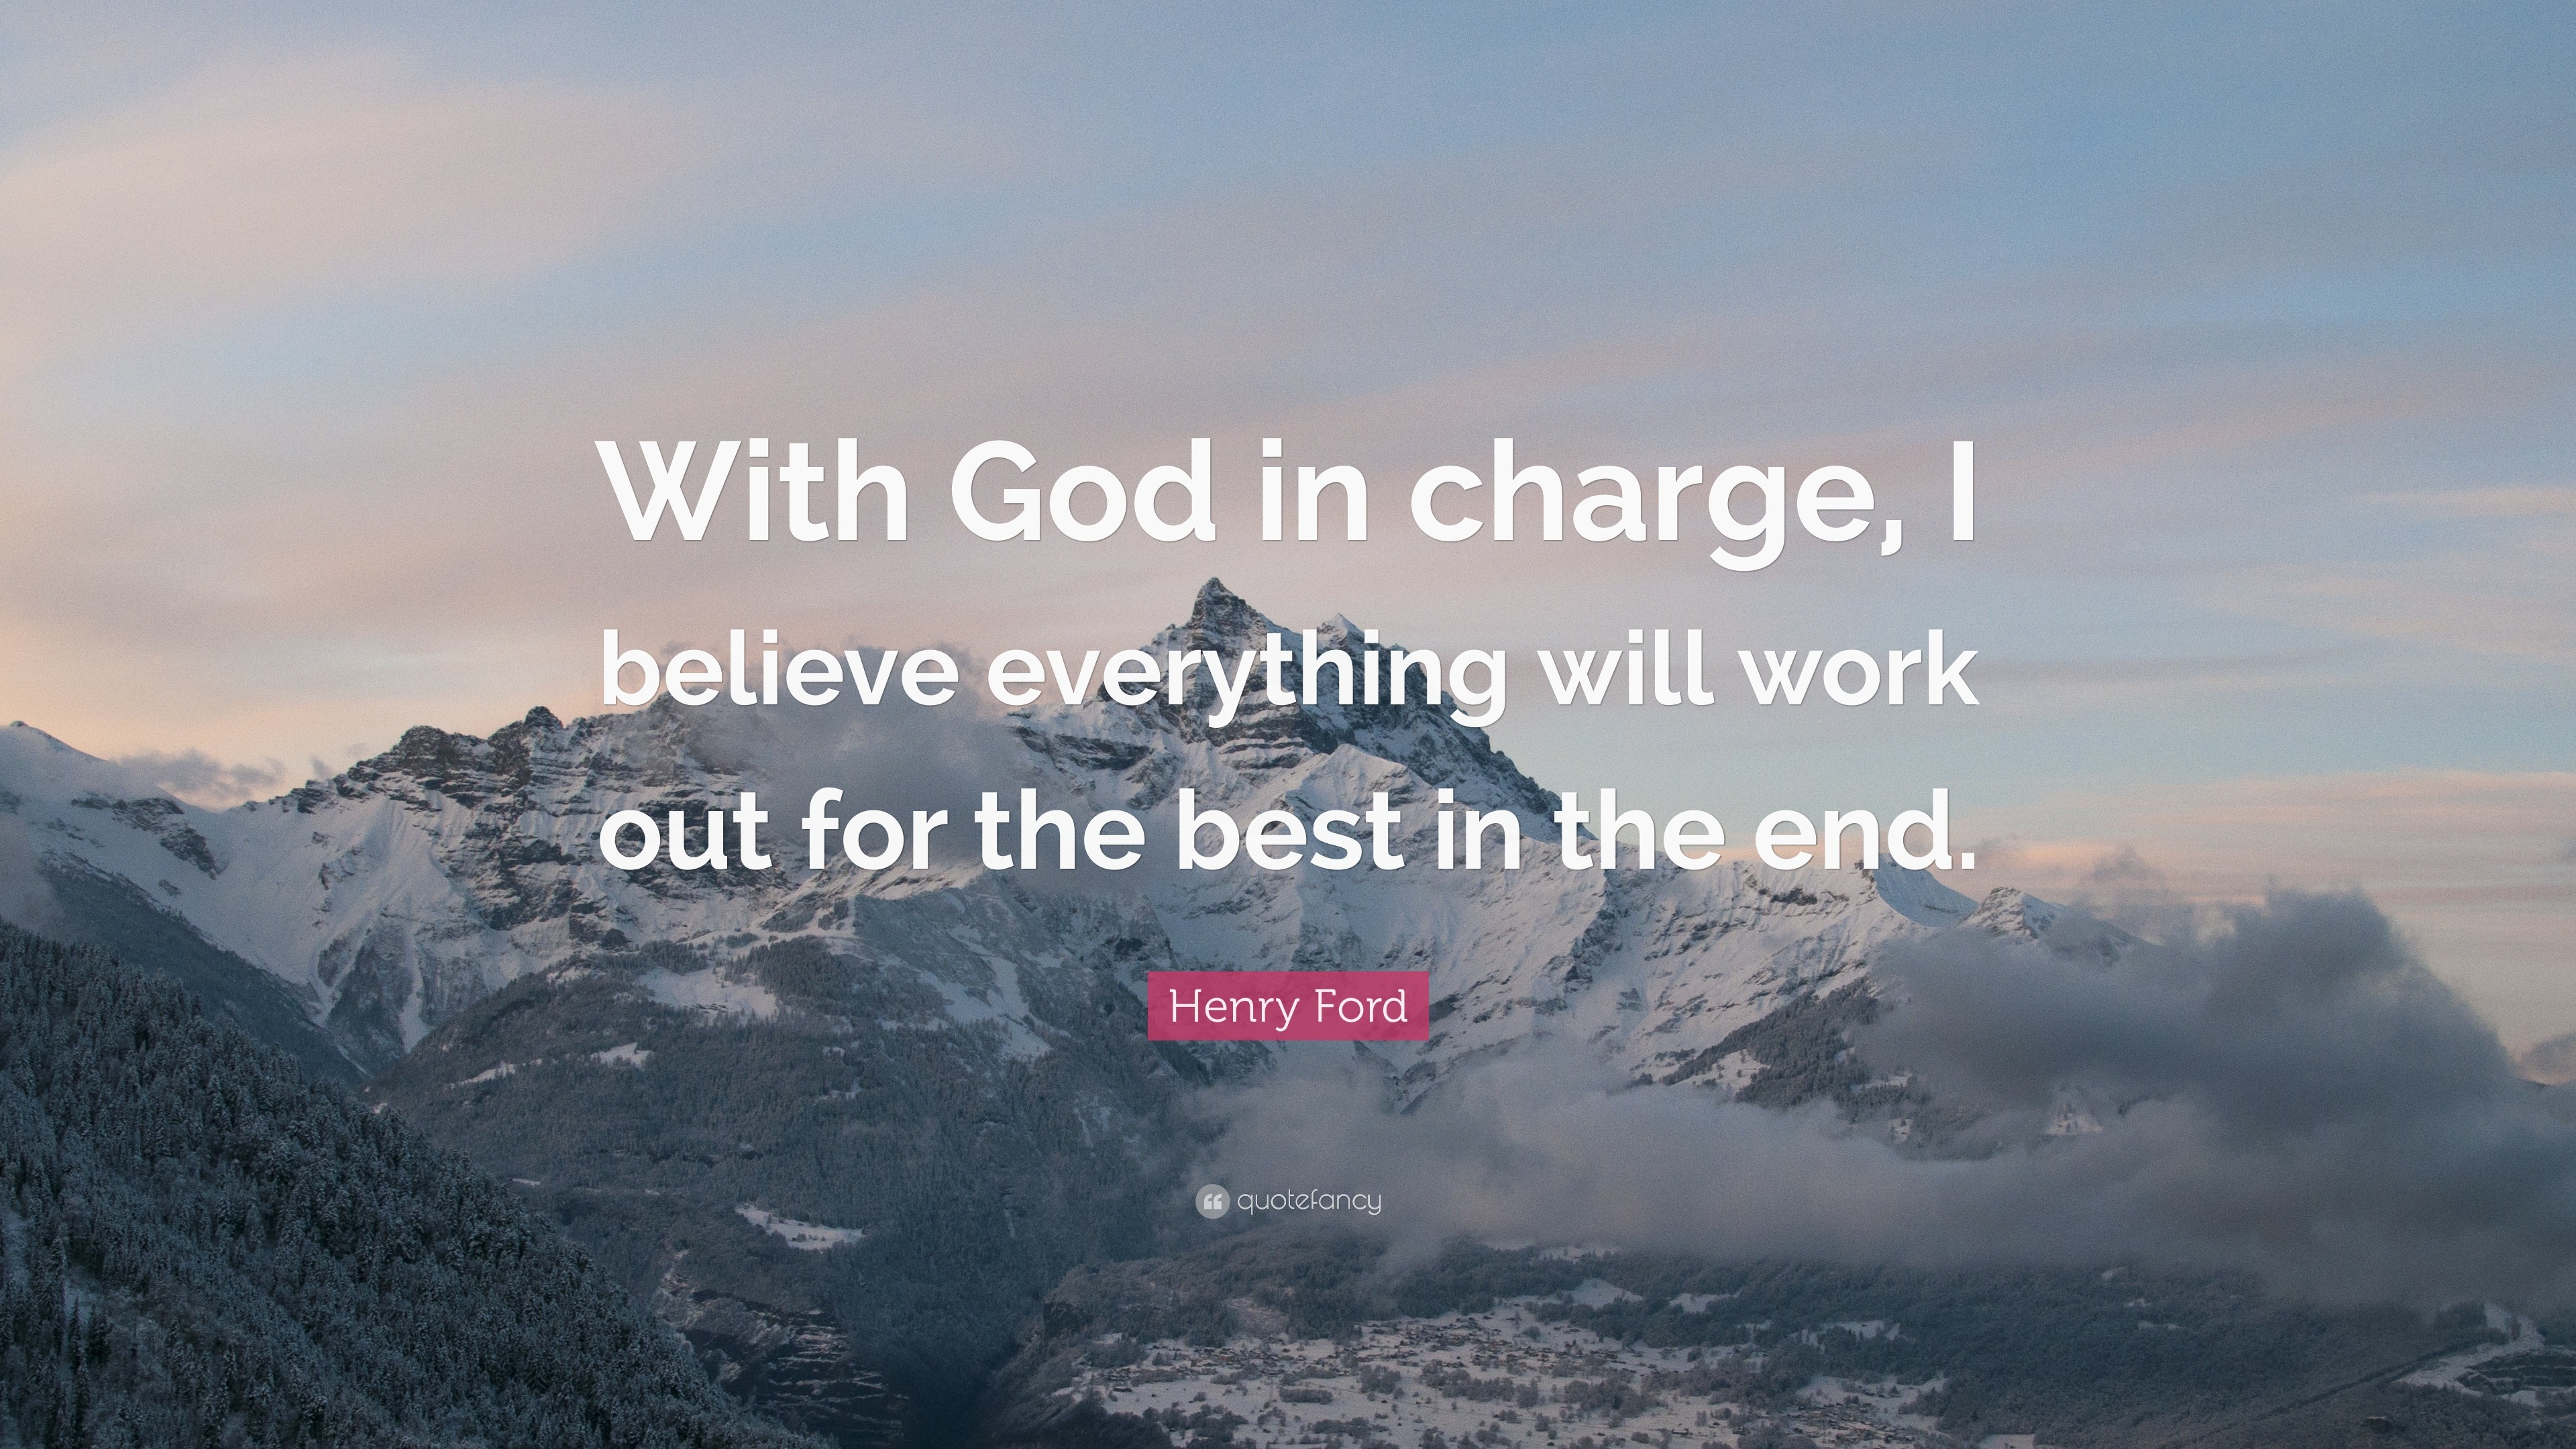 Henry Ford Quote: "With God in charge, I believe everything will work out for the best in the ...